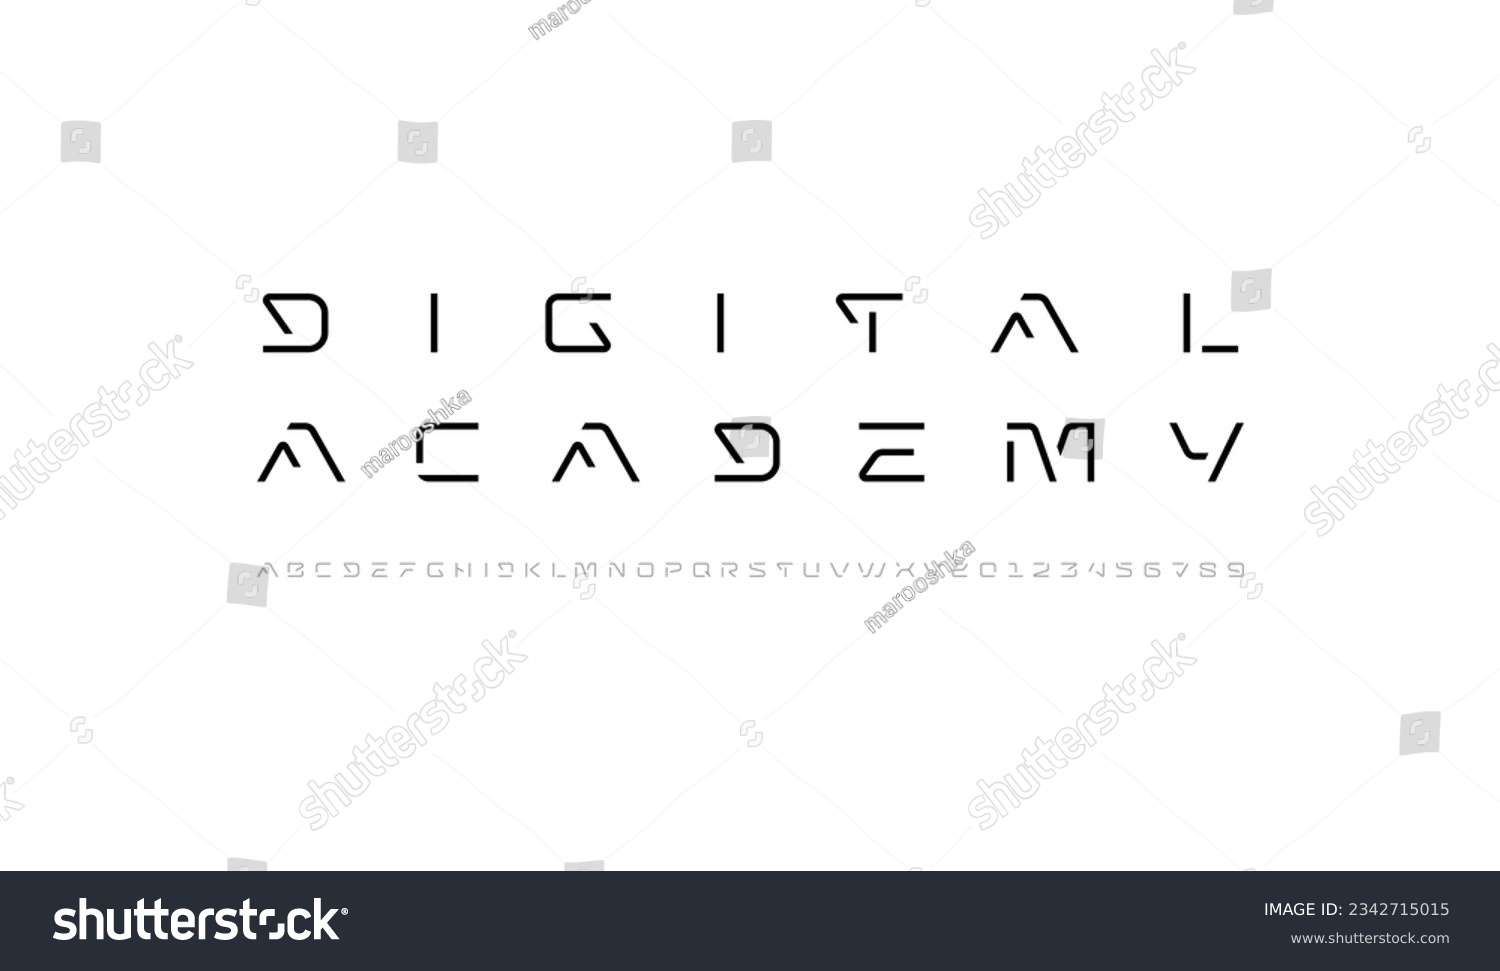 Tech font, digital alphabet, thin Latin letters A, B, C, D, E, F, G, H, I, J, K, L, M, N, O, P, Q, R, S, T, U, V, W, X, Y, Z and Arab numerals 0, 1, 2, 3, 4, 5, 6, 7, 8, 9 made in design cyber future #2342715015